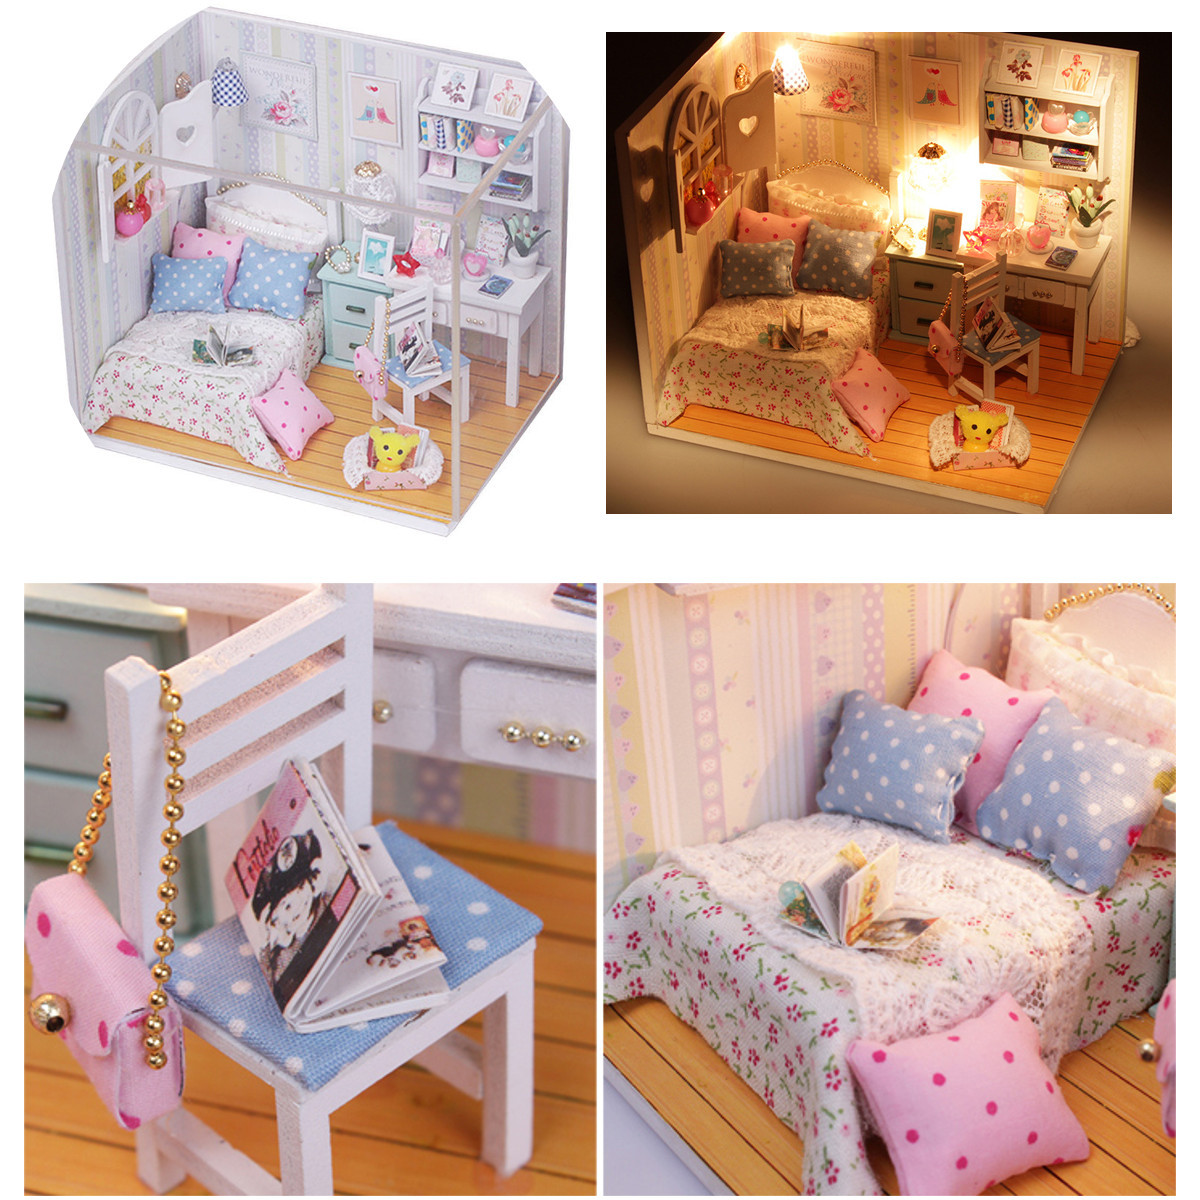 Hoomeda-DIY-Wood-Dollhouse-Miniature-With-LED-Furniture-Cover-Doll-House-Room-1019741